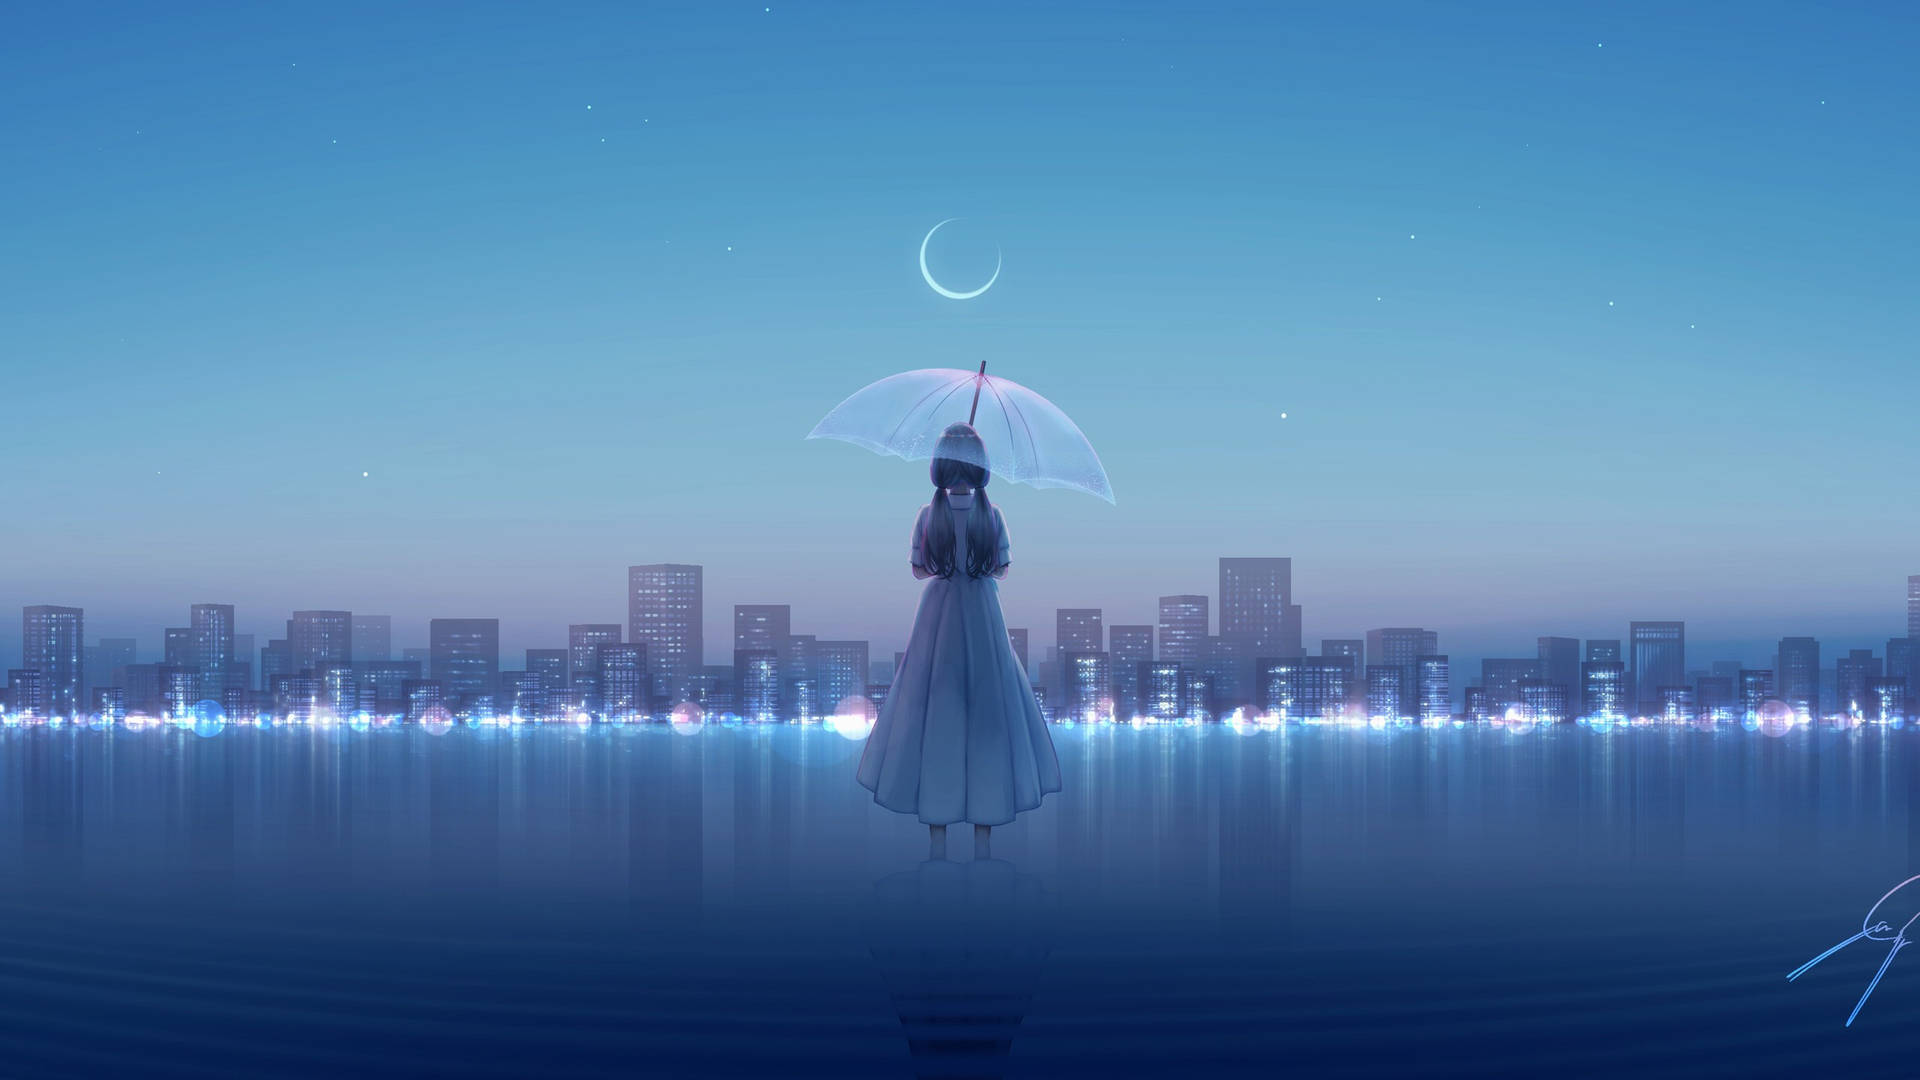 a girl is standing in the water with an umbrella Wallpaper